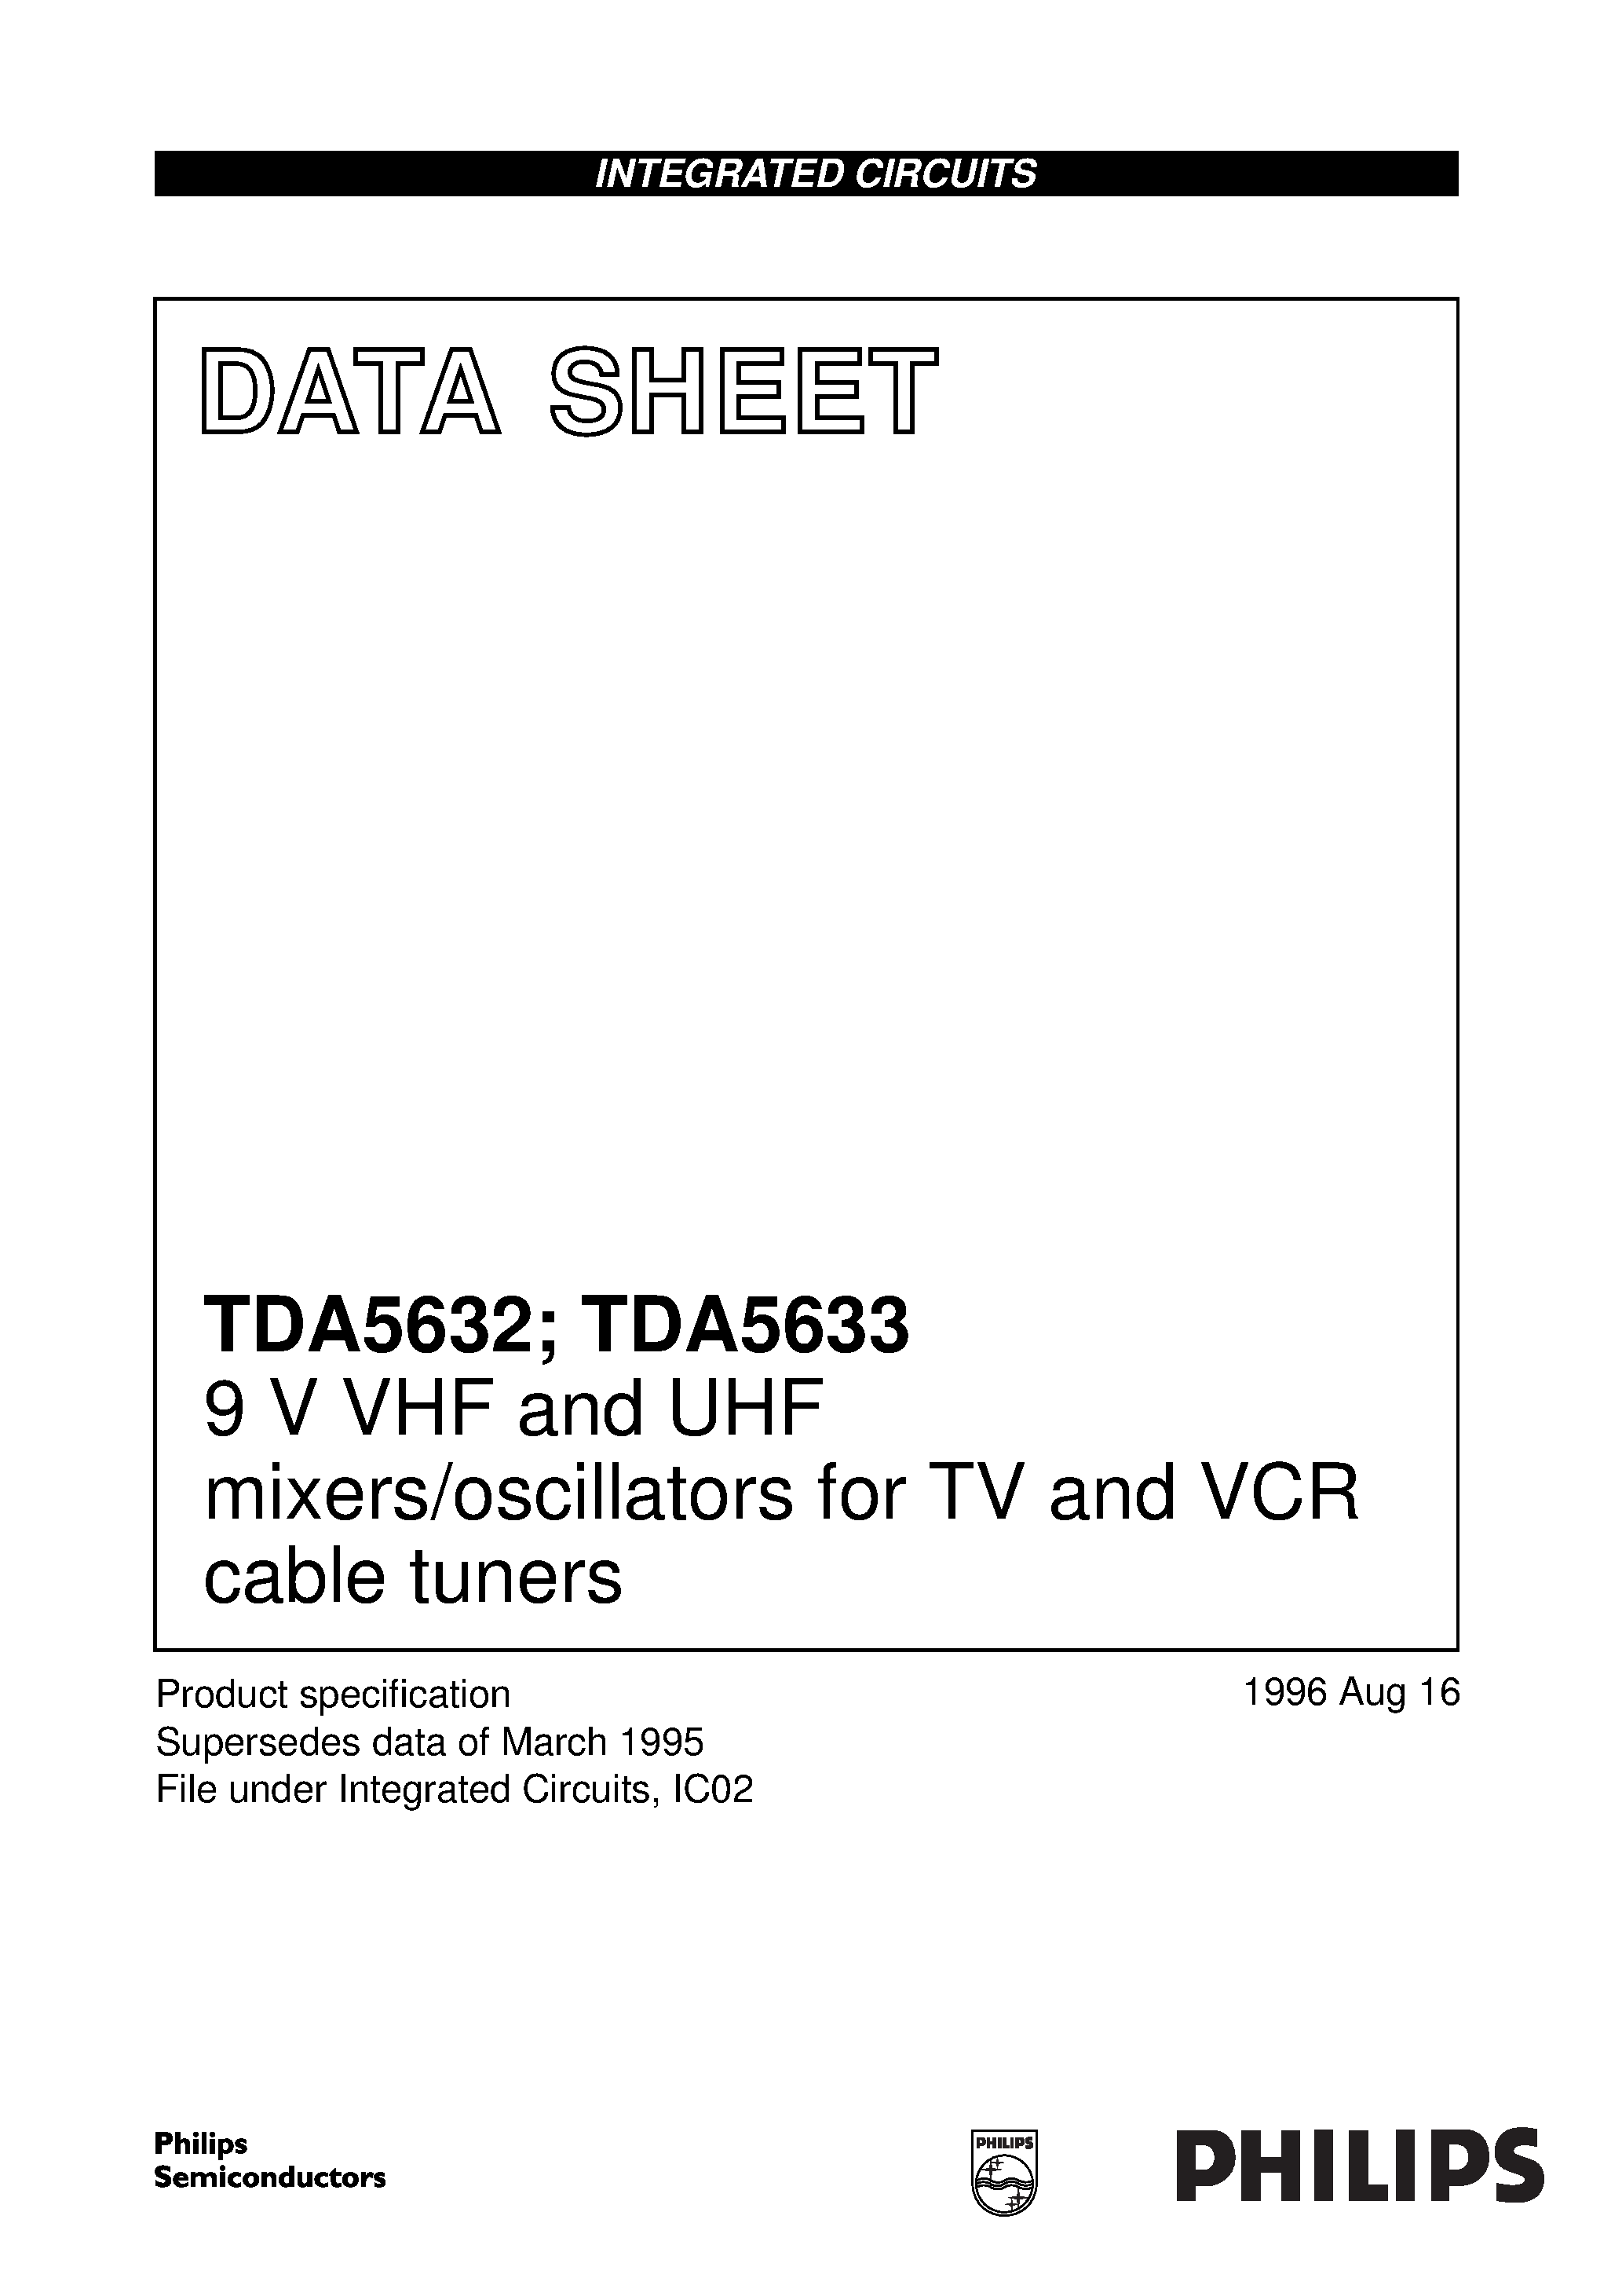 Datasheet TDA5633M - 9 V VHF and UHF mixers/oscillators for TV and VCR cable tuners page 1